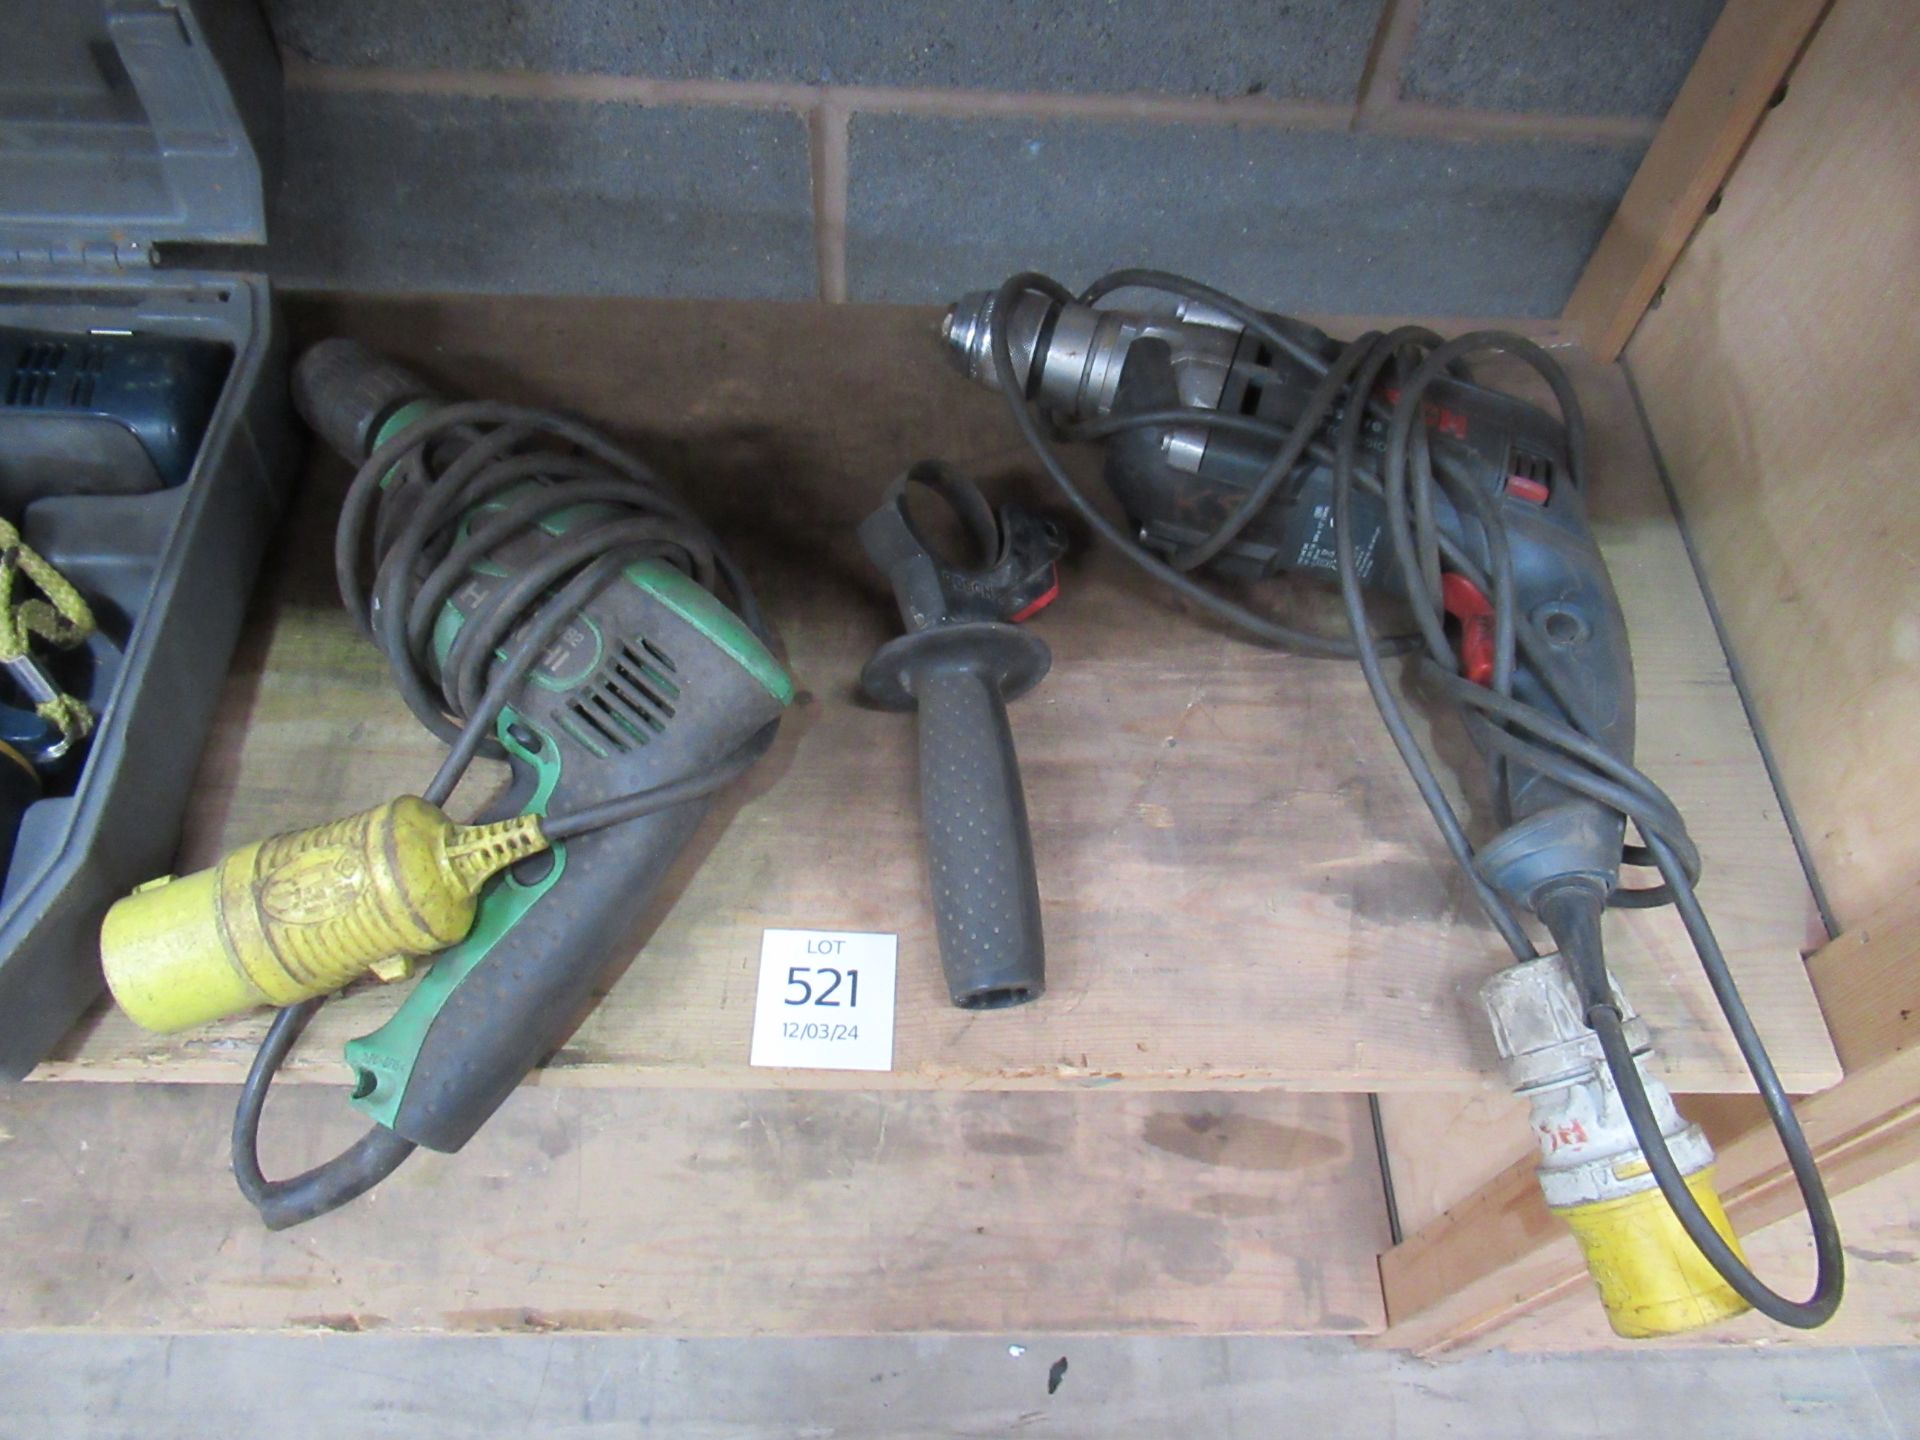 A Boxed Ryobi 18V Drill Set, together with An Hitchi 110V Drill and Bosch 110V Drill - Image 3 of 3